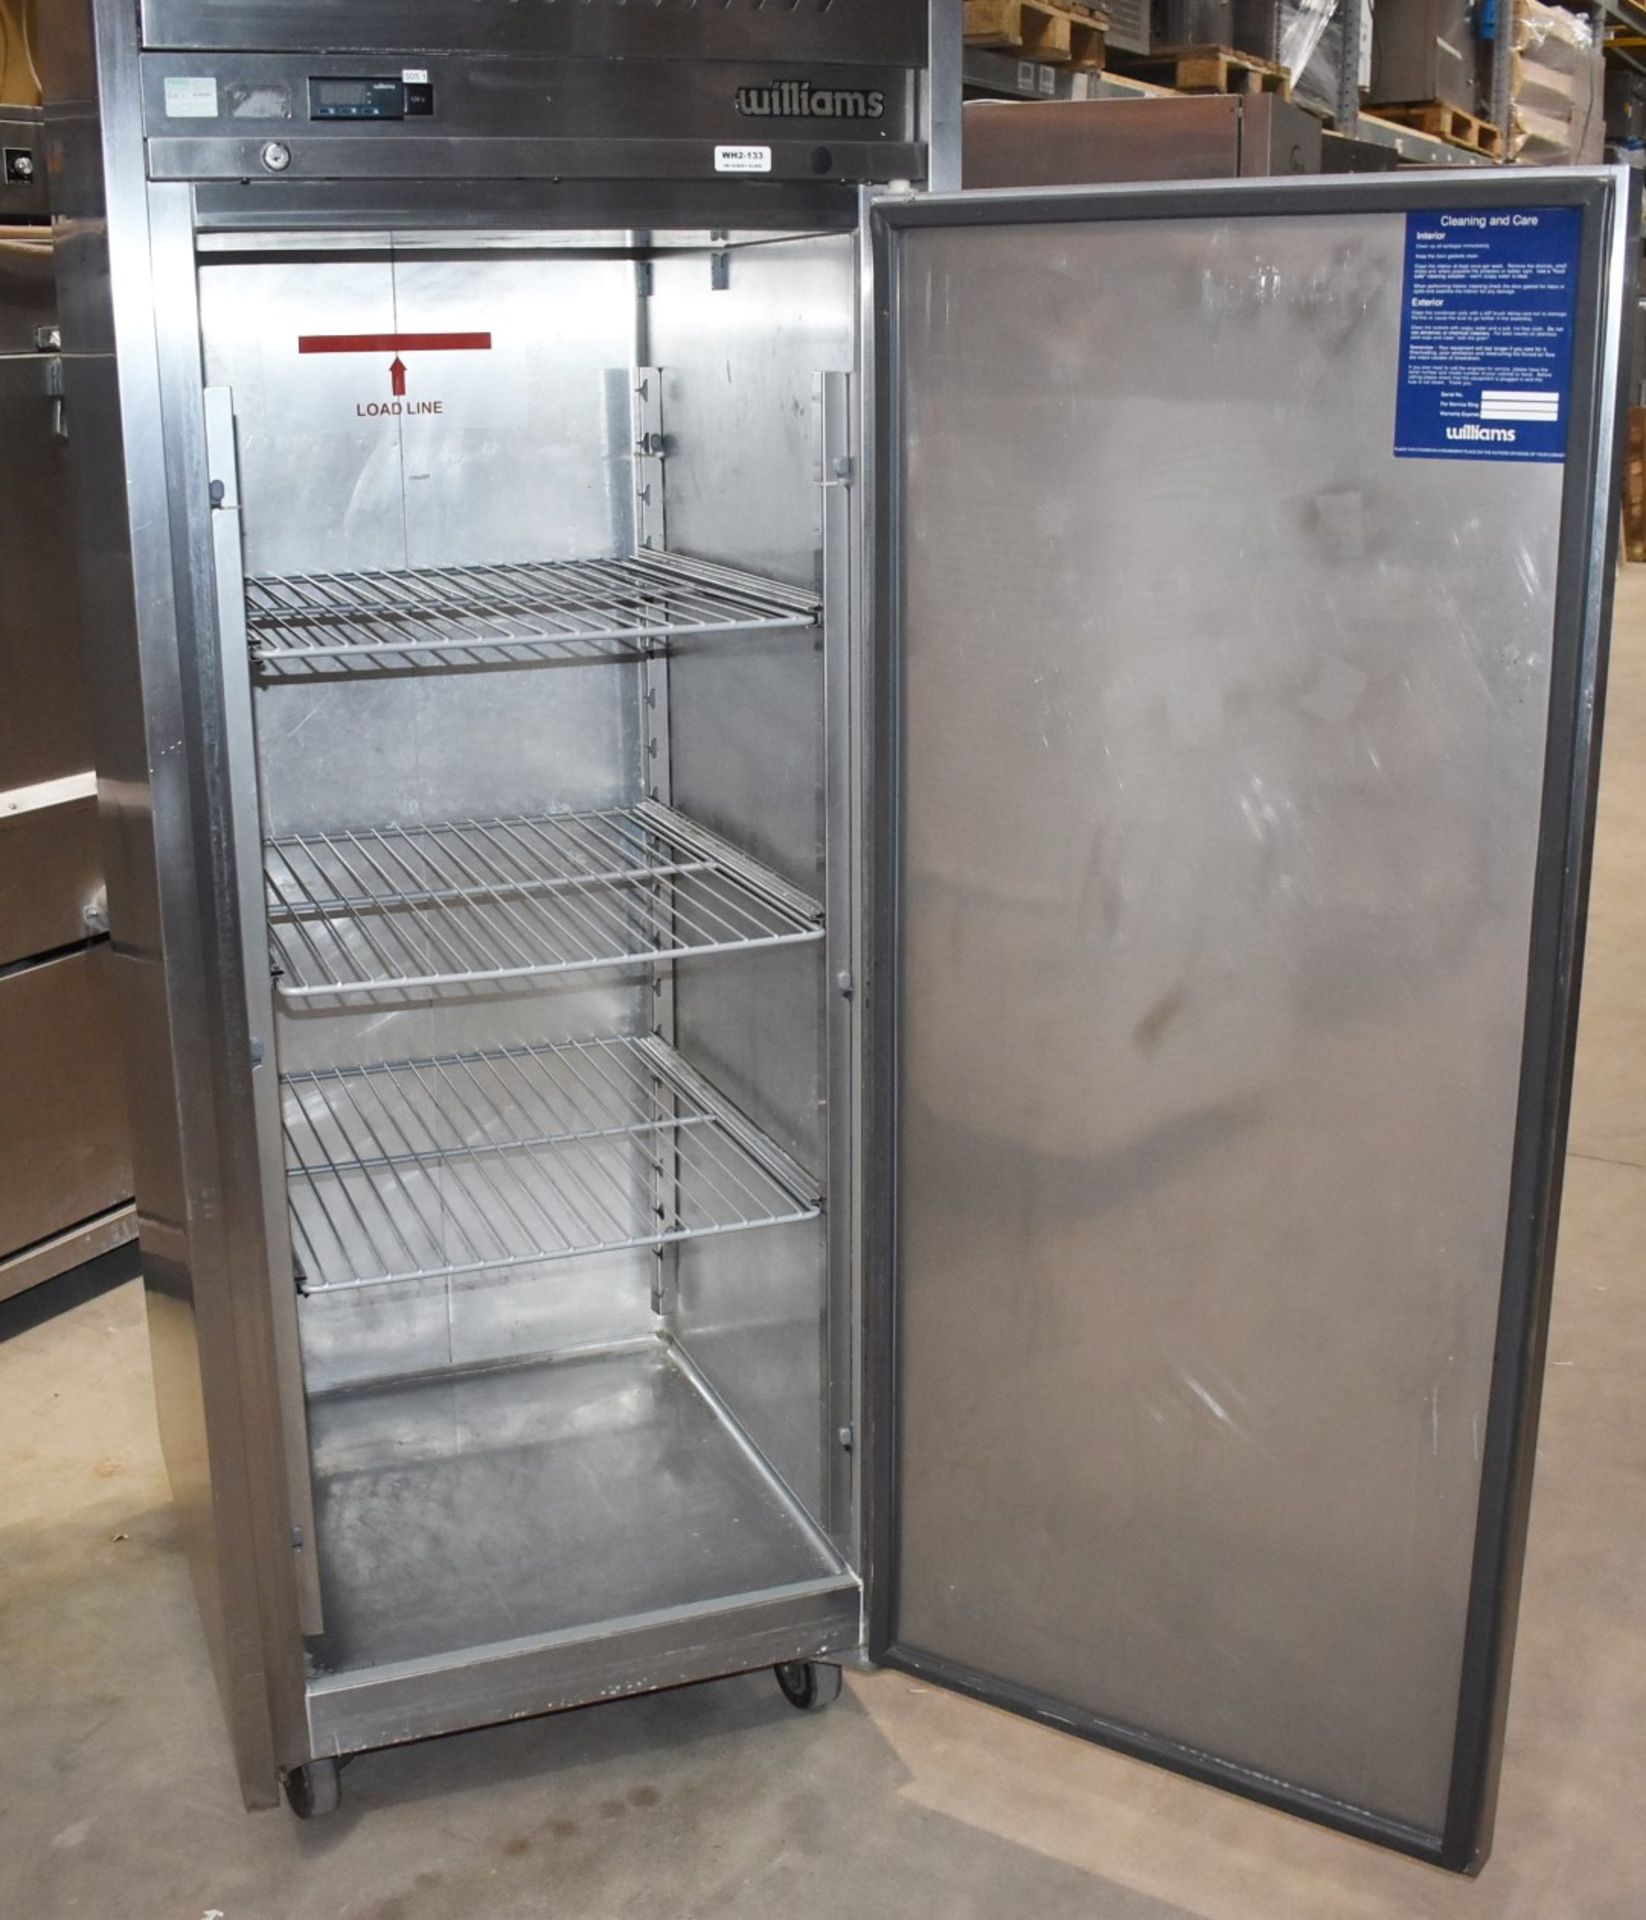 1 x Williams Upright Single Door Refrigerator With Stainless Steel Exterior - Model HJ1SA - Recently - Image 7 of 11